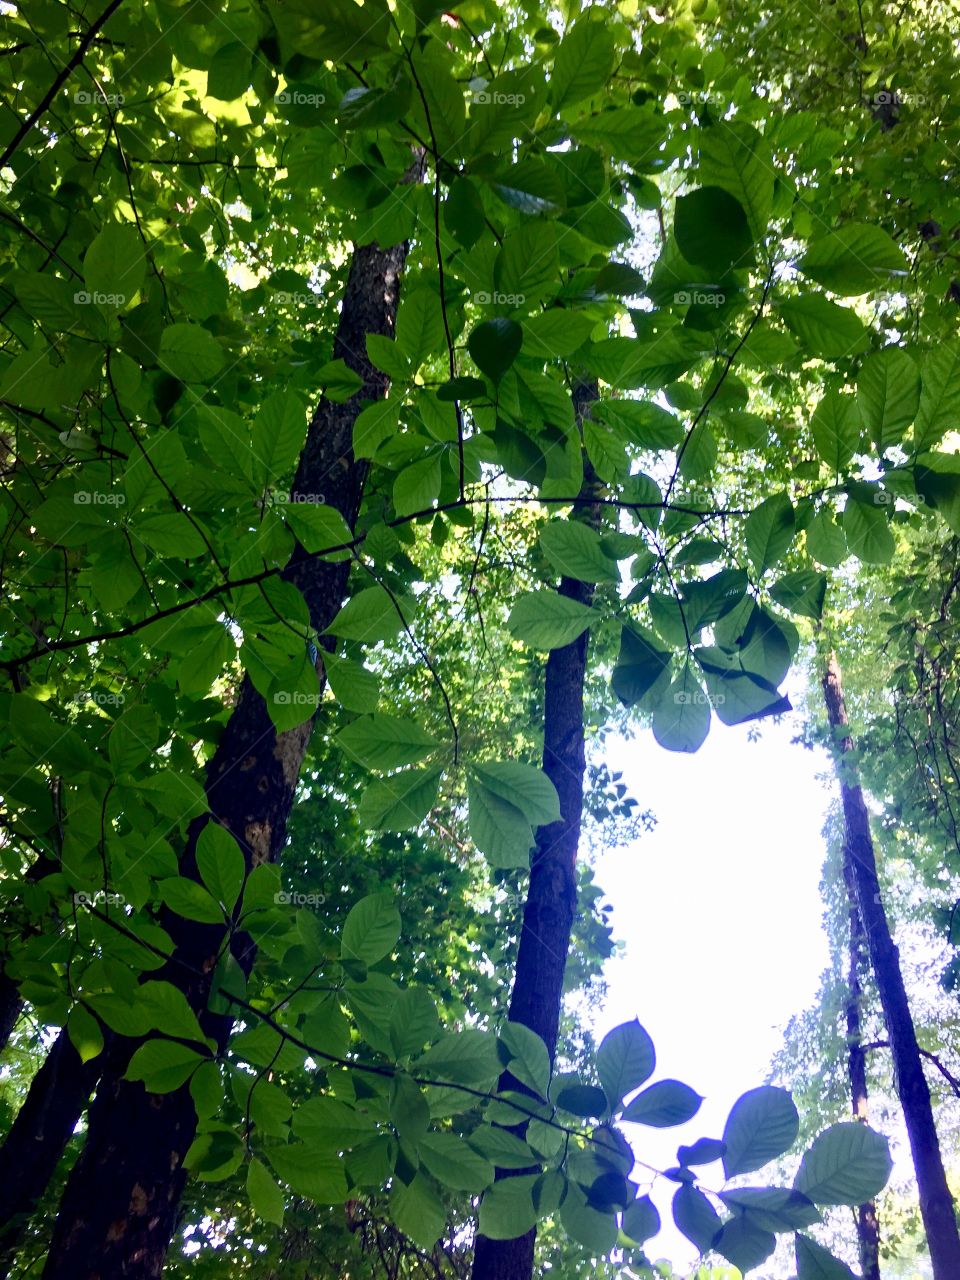 Morning walk in the woods, upwards view